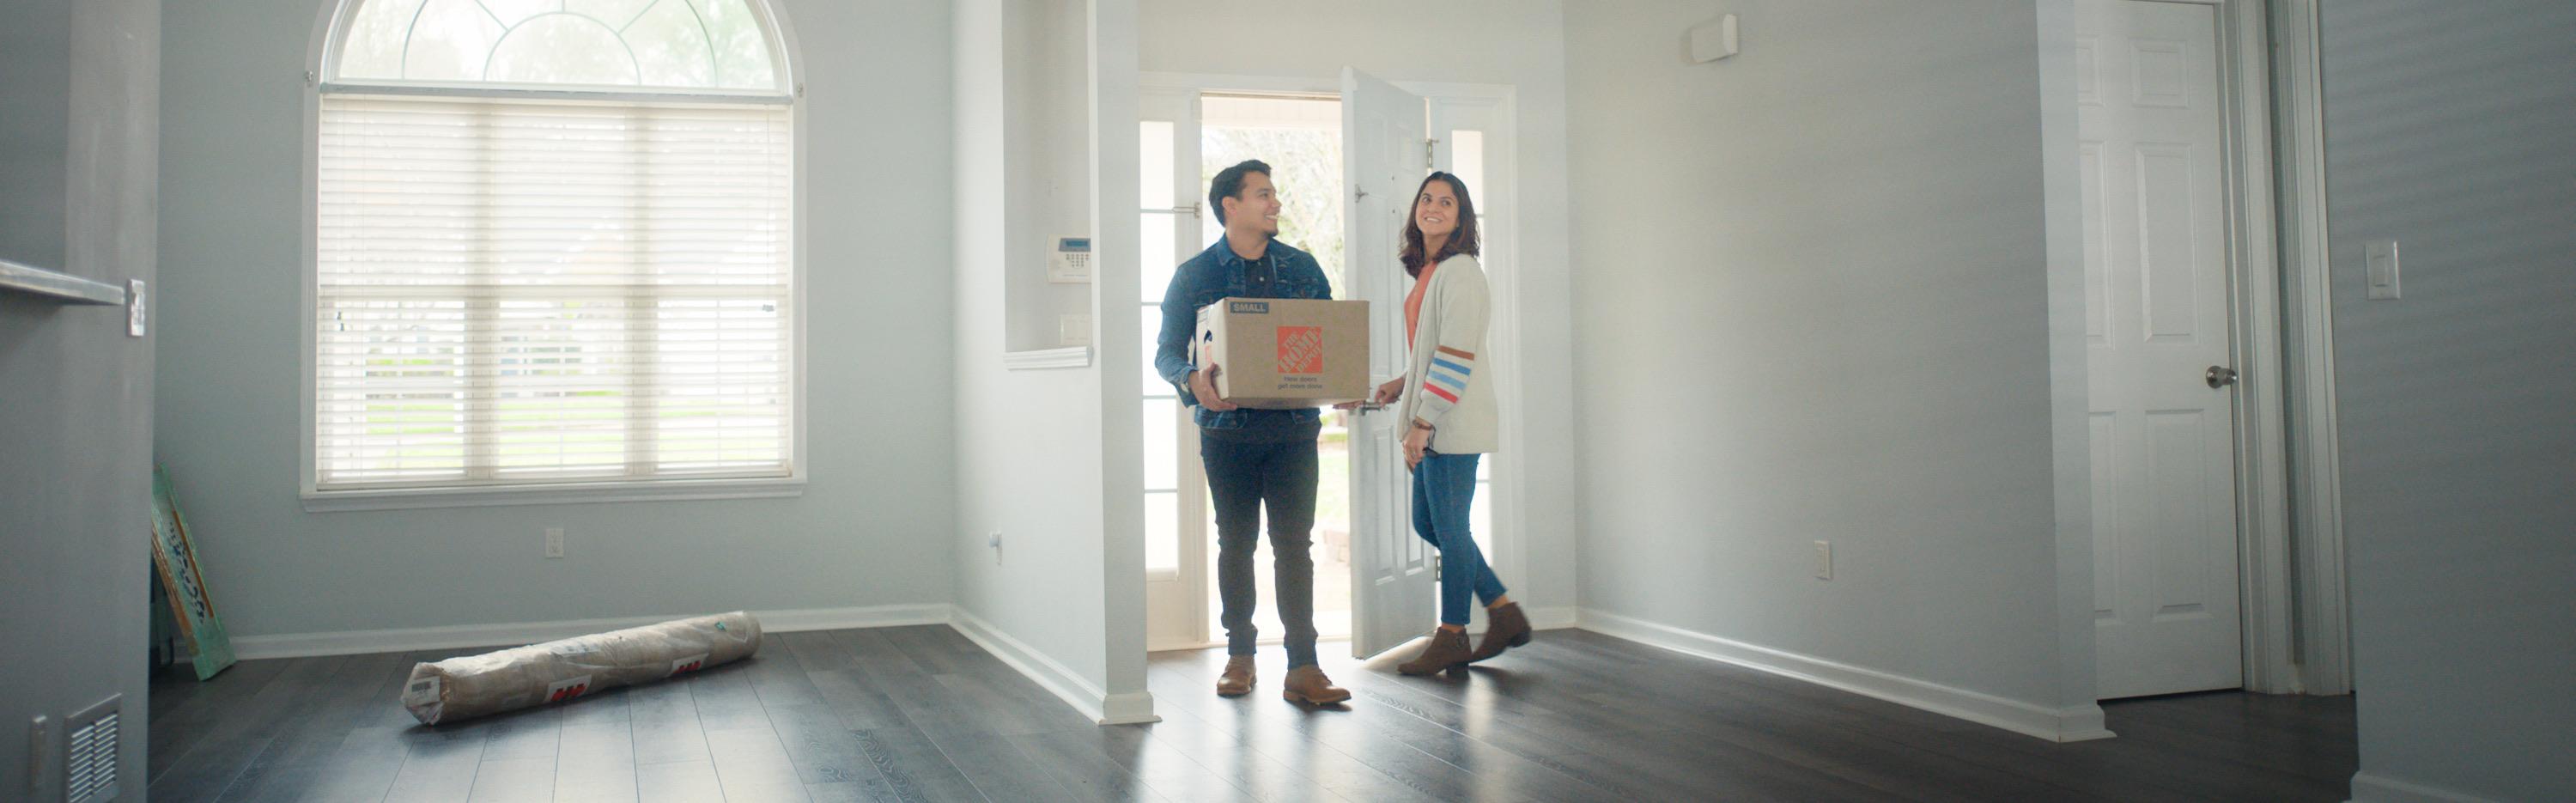 Couple carrying box into empty house